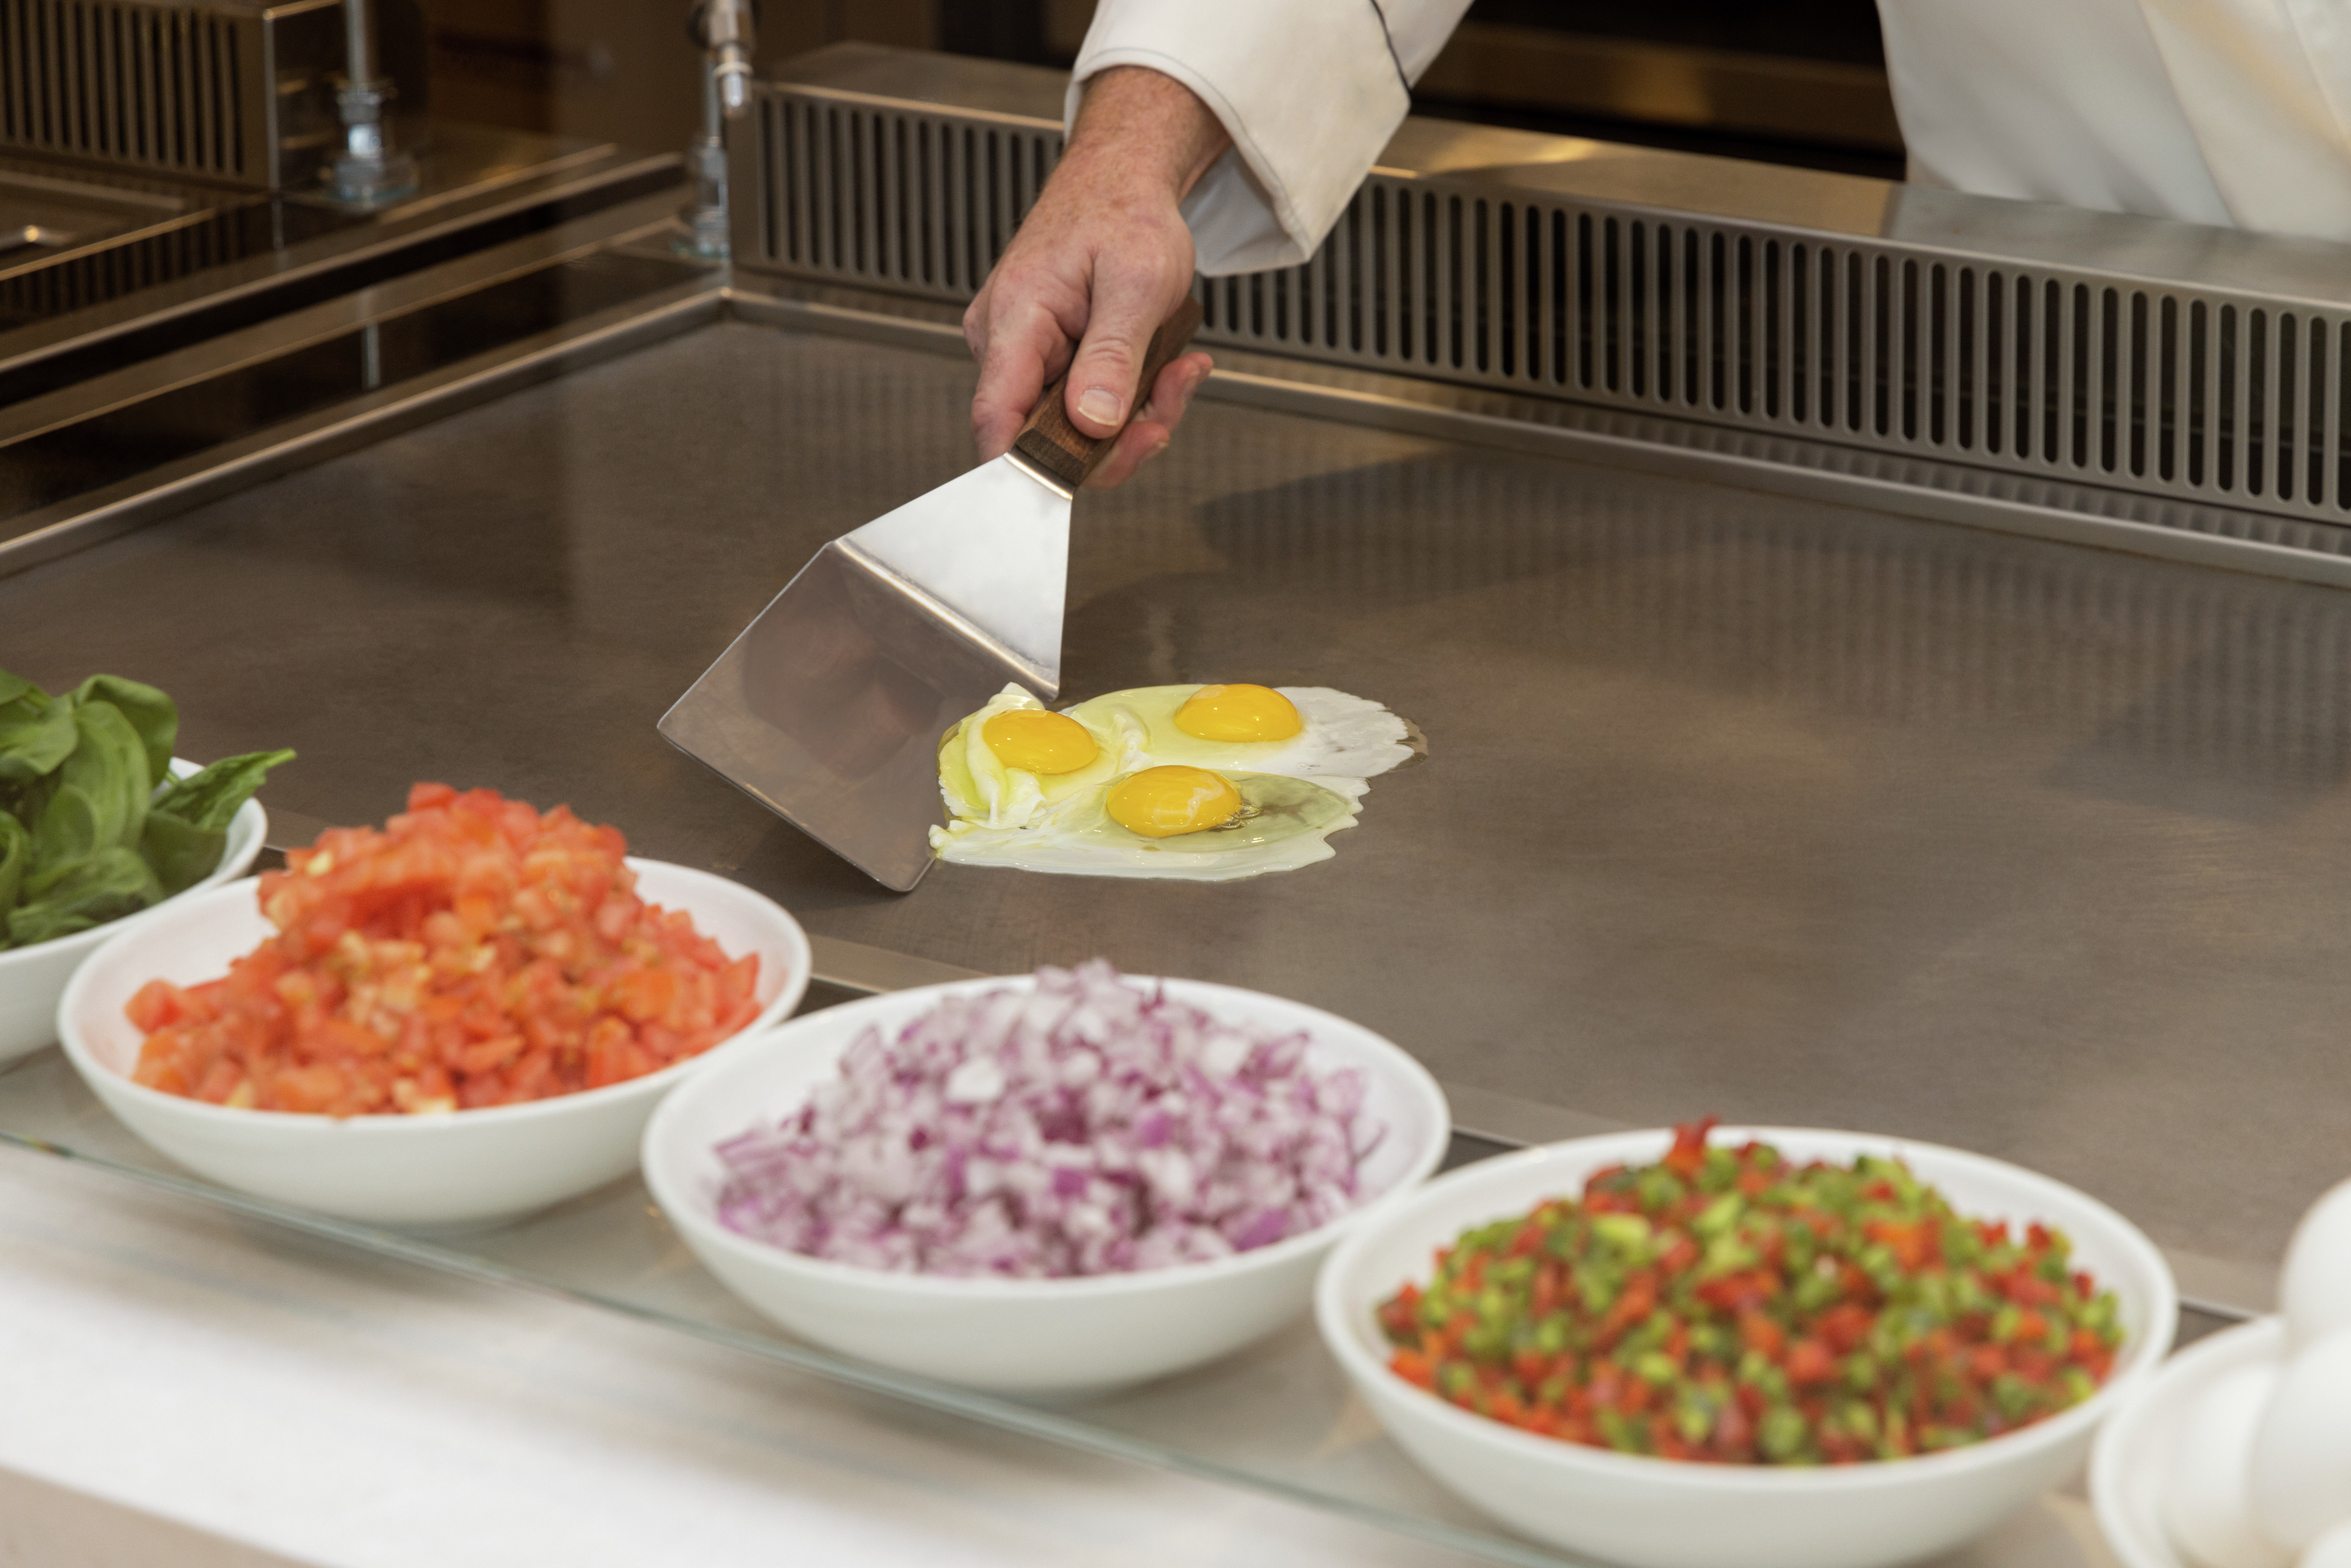 Detail of on-site omelet chef for daily morning breakfast offering